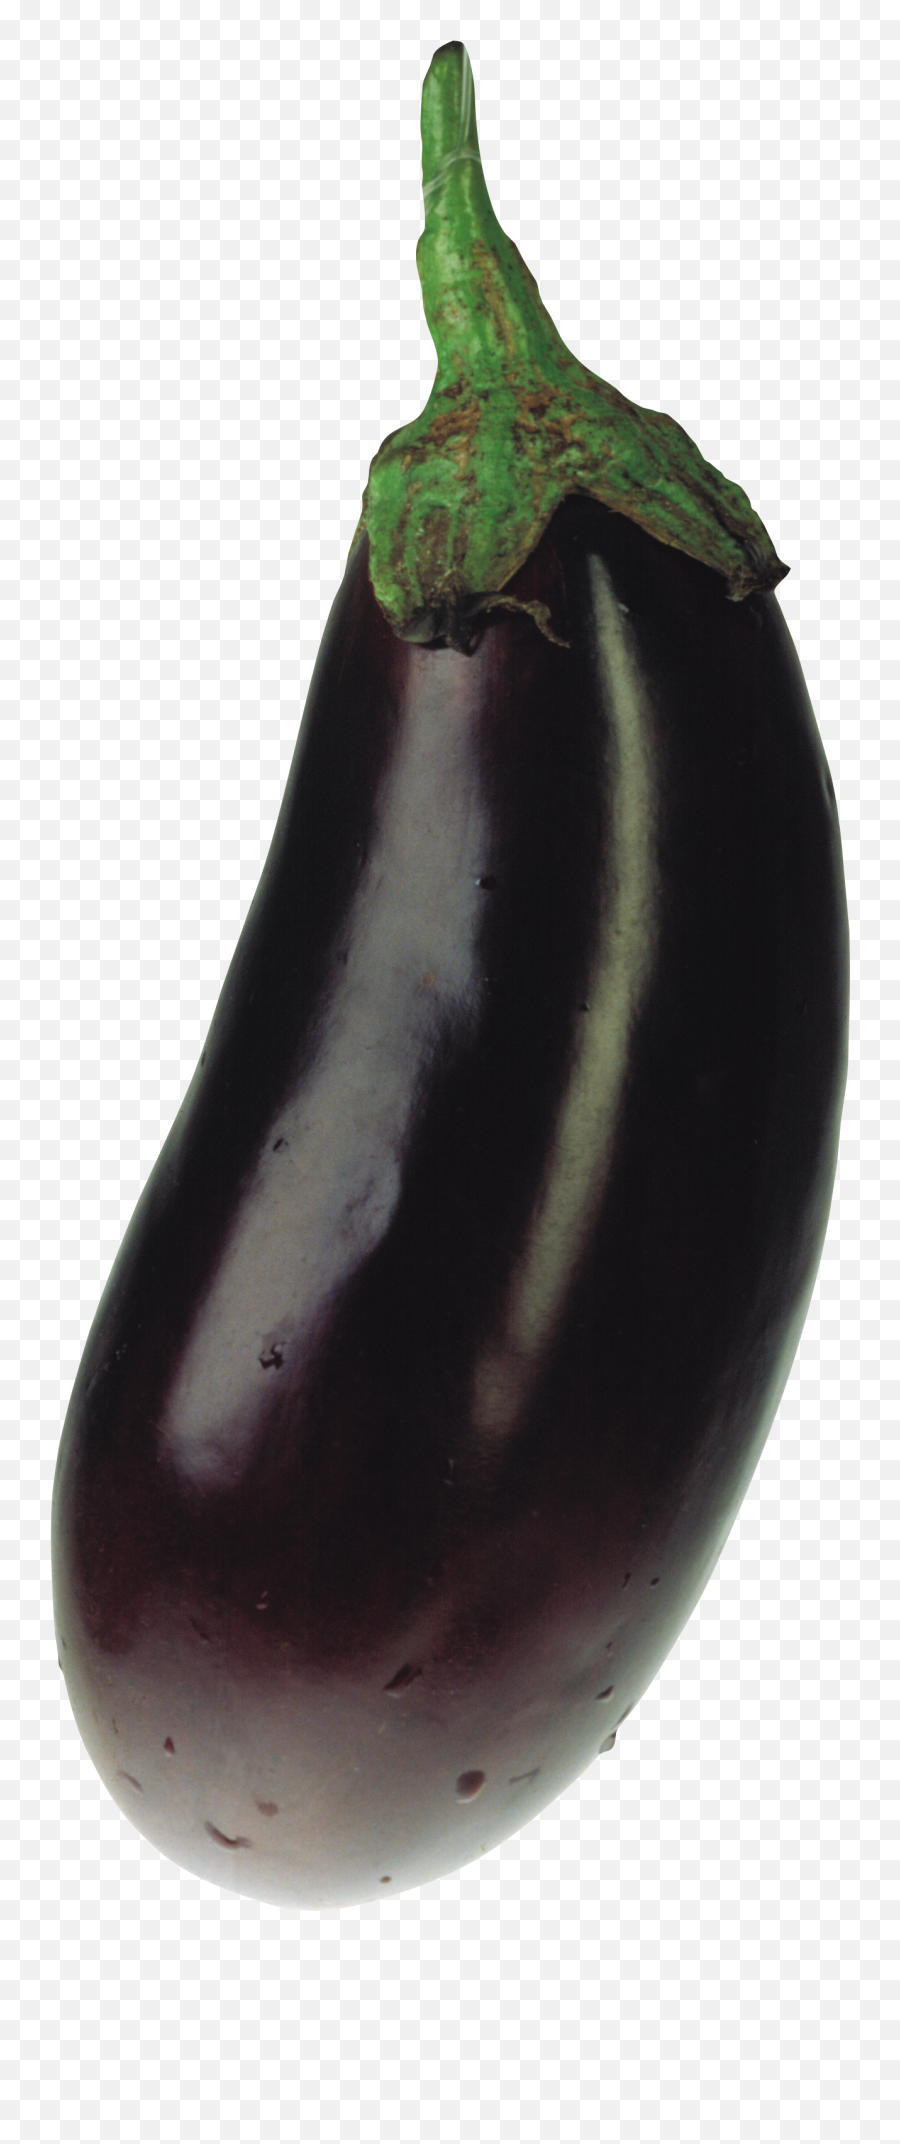 Full Size Png Image - Eggplant With No Background,Eggplant Transparent